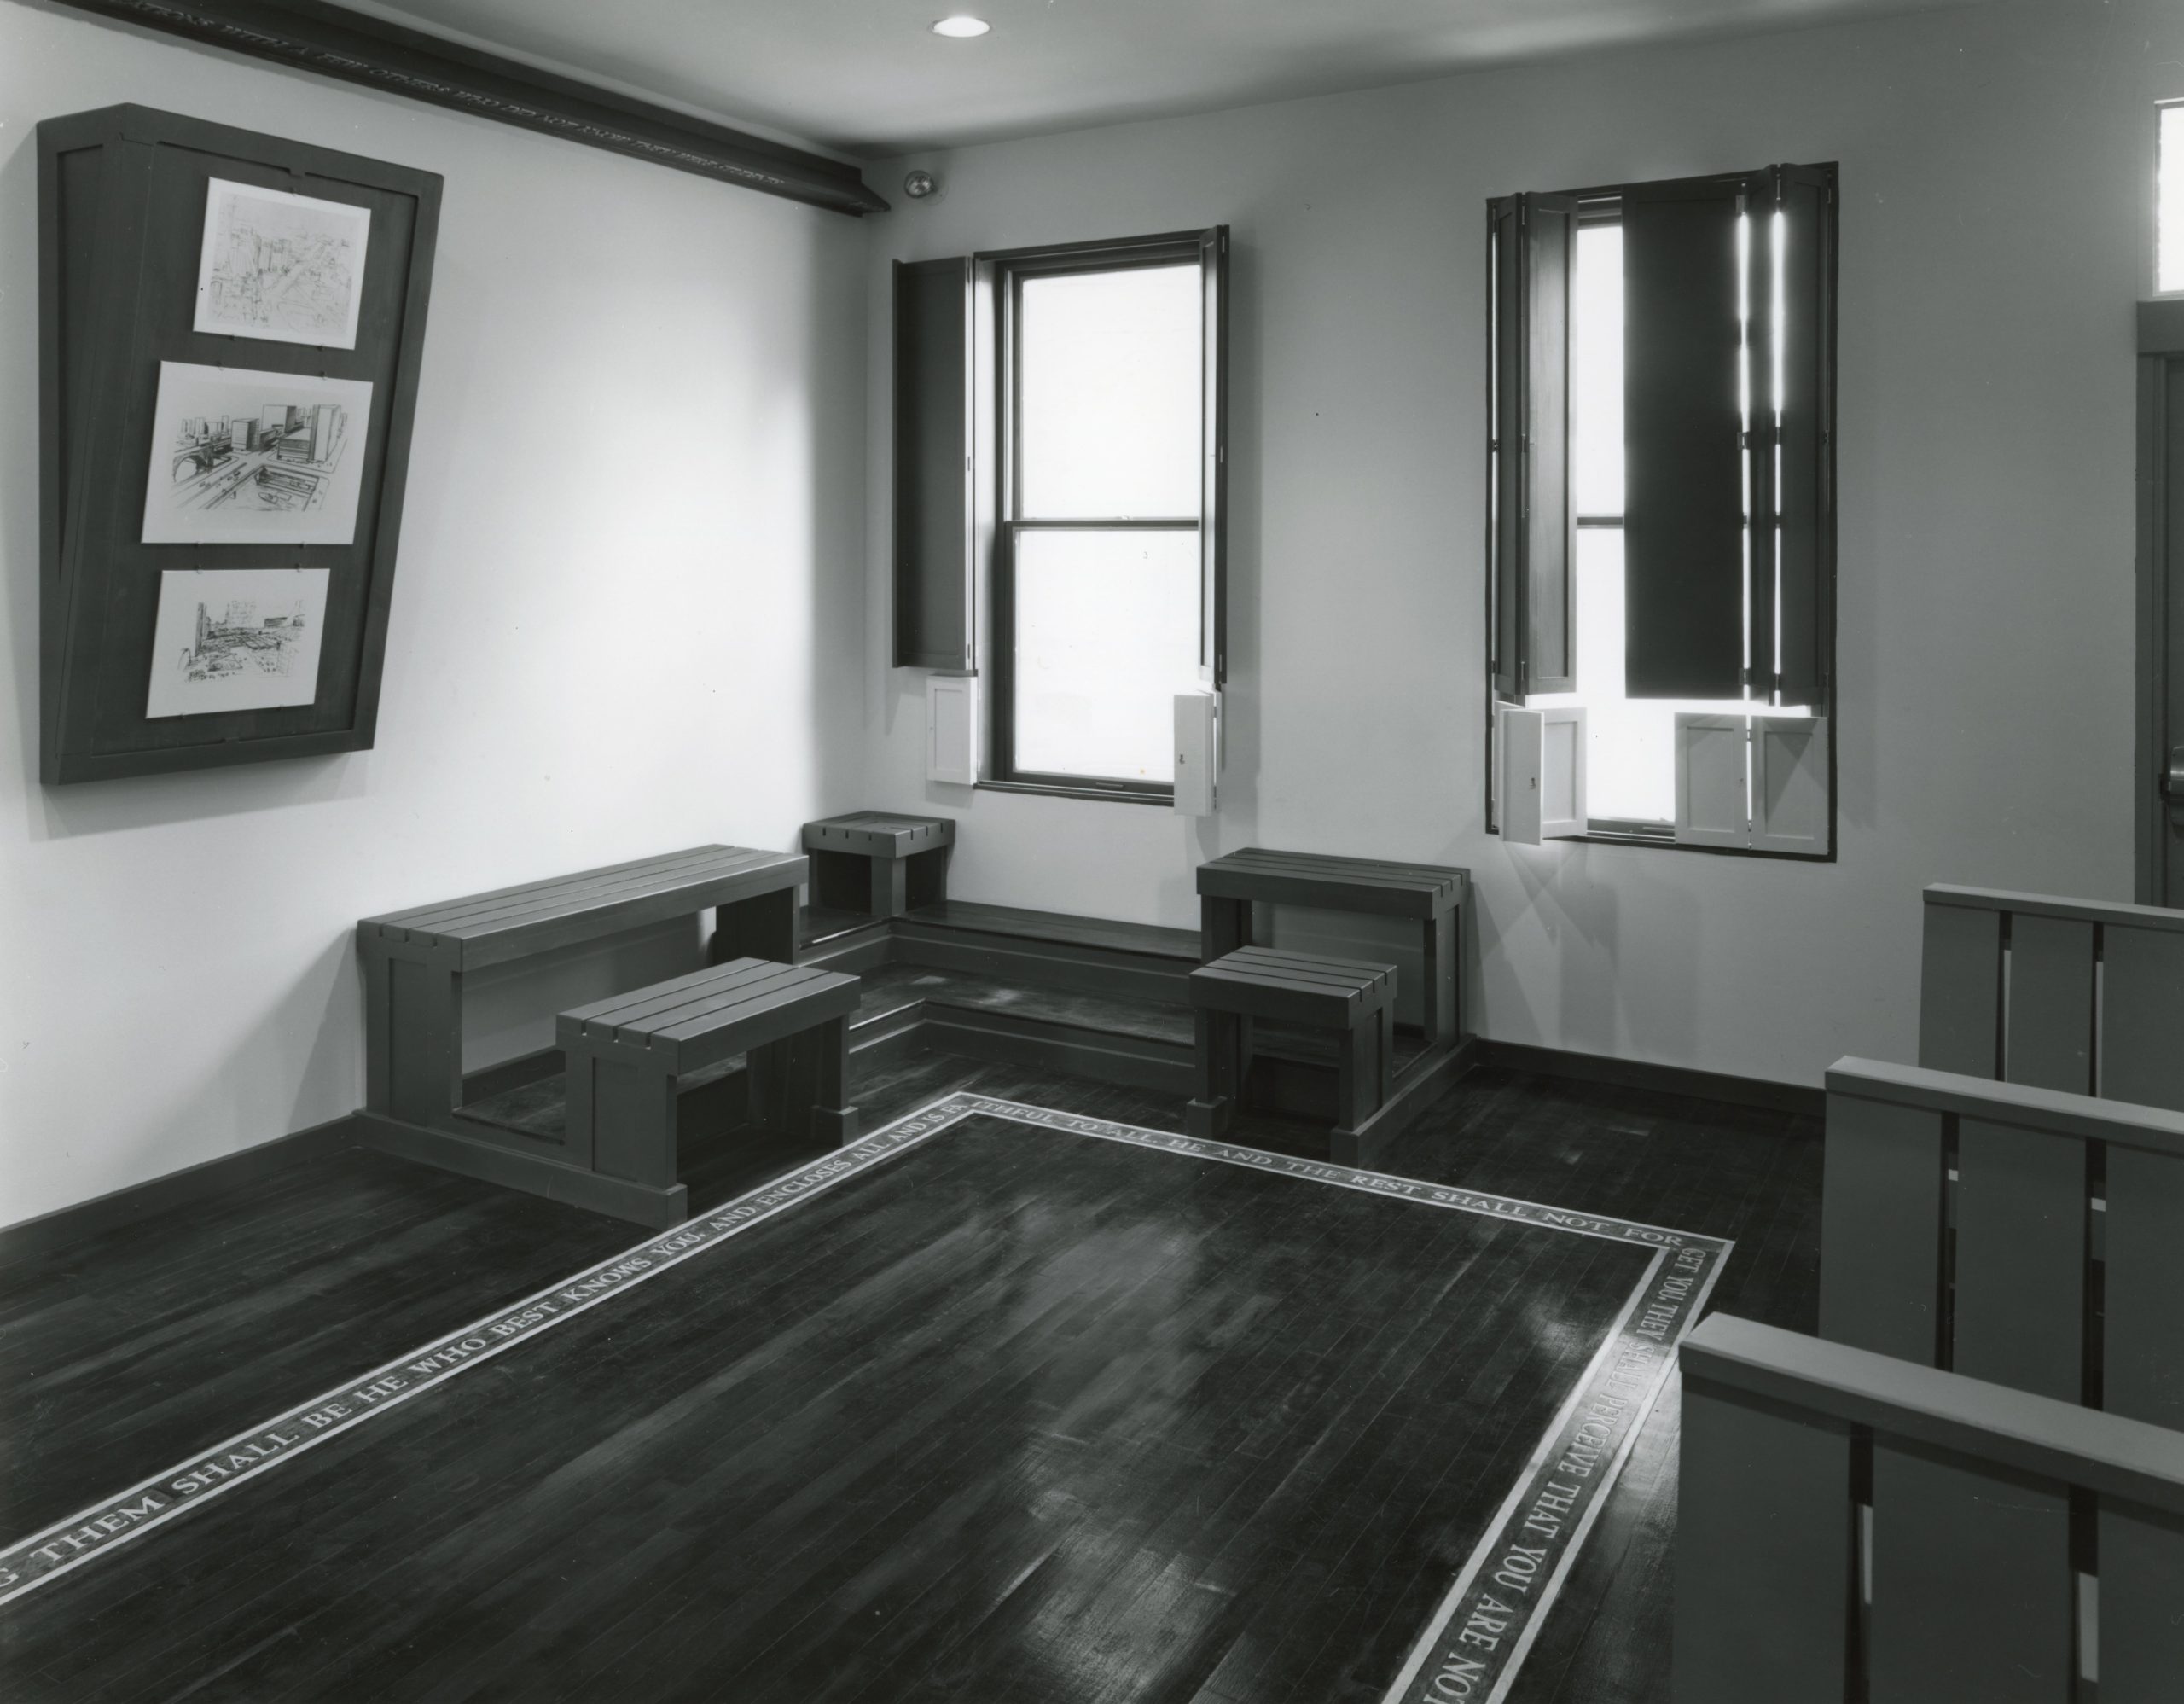 Black and white photograph of Siah Armajani's "Louis Kahn Lecture Room" installation, which resembles a Quaker meeting house and lecture hall. 